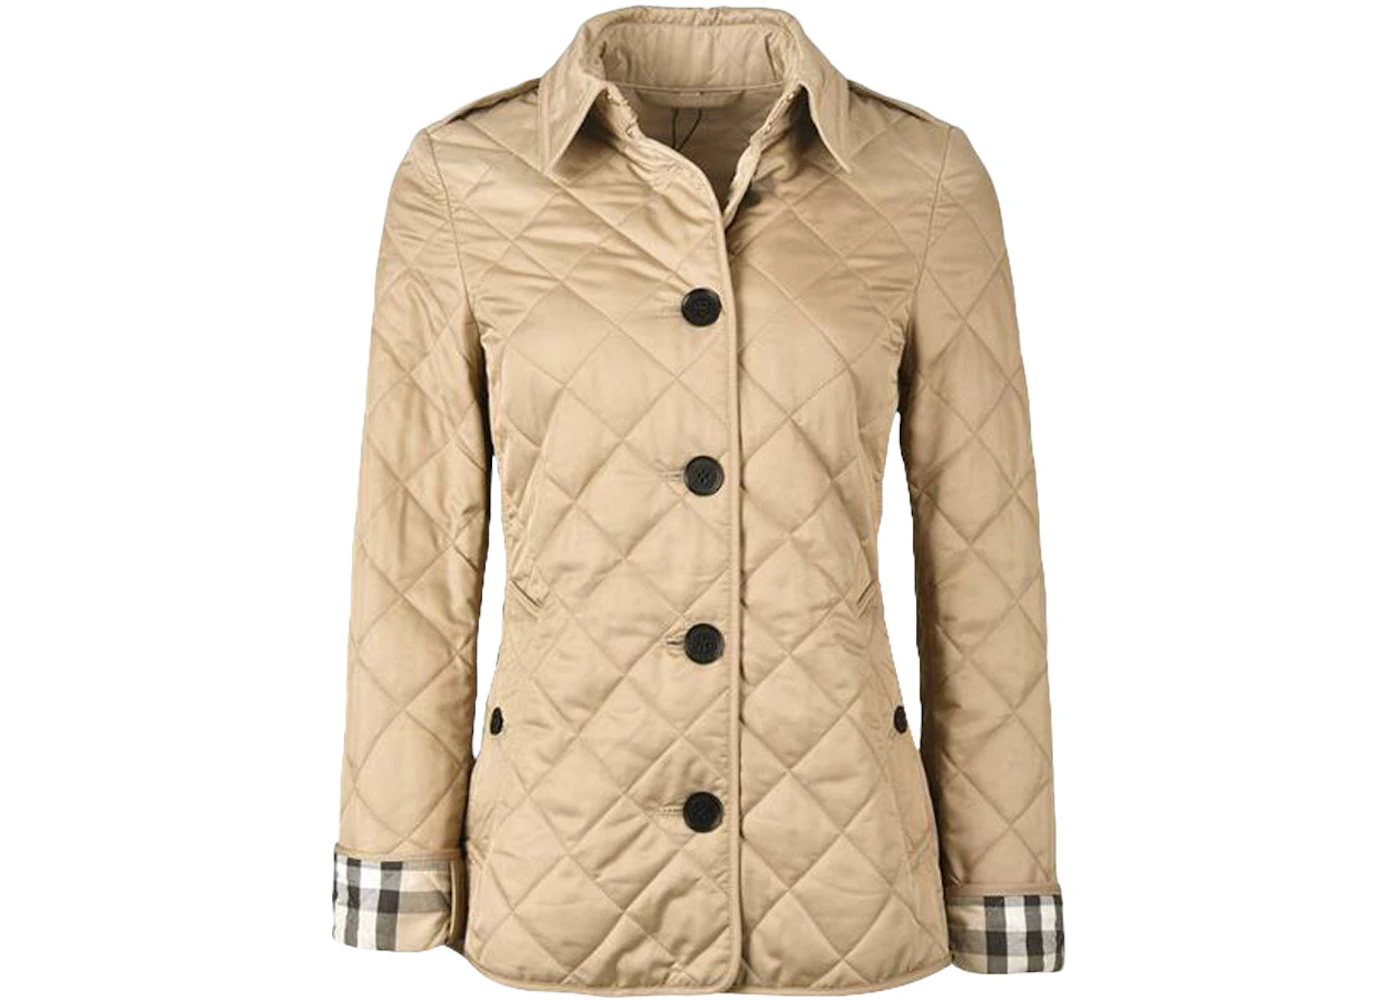 Burberry Diamond Quilted Jacket Beige - US